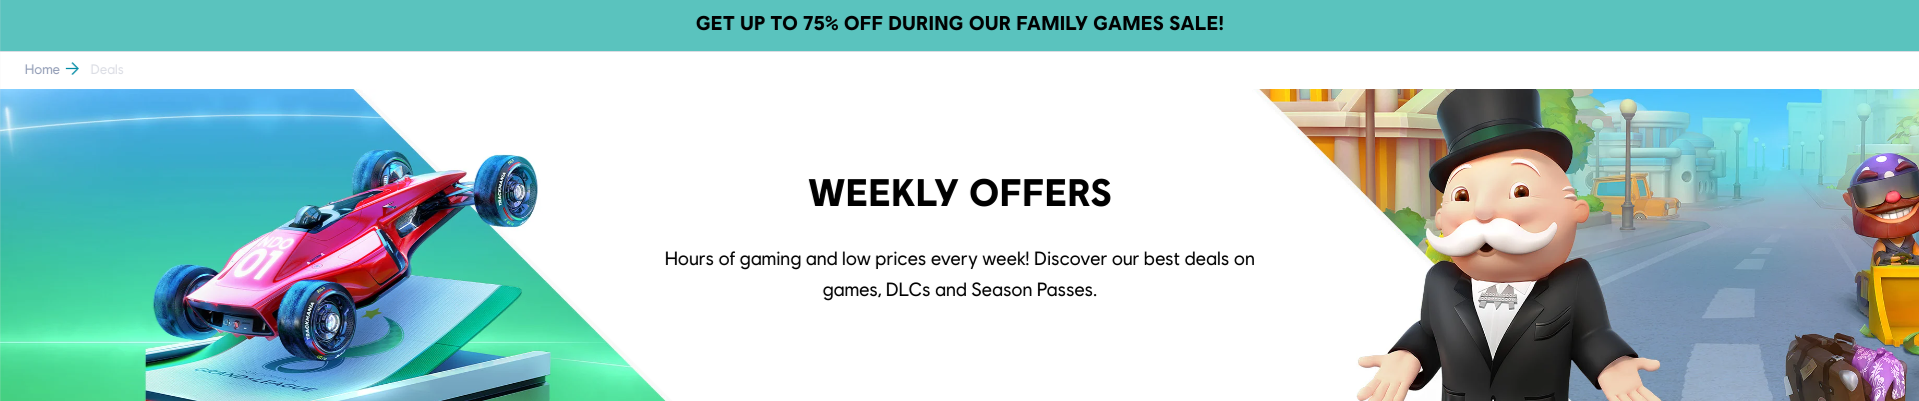 Discount on family games on the Ubisoft store